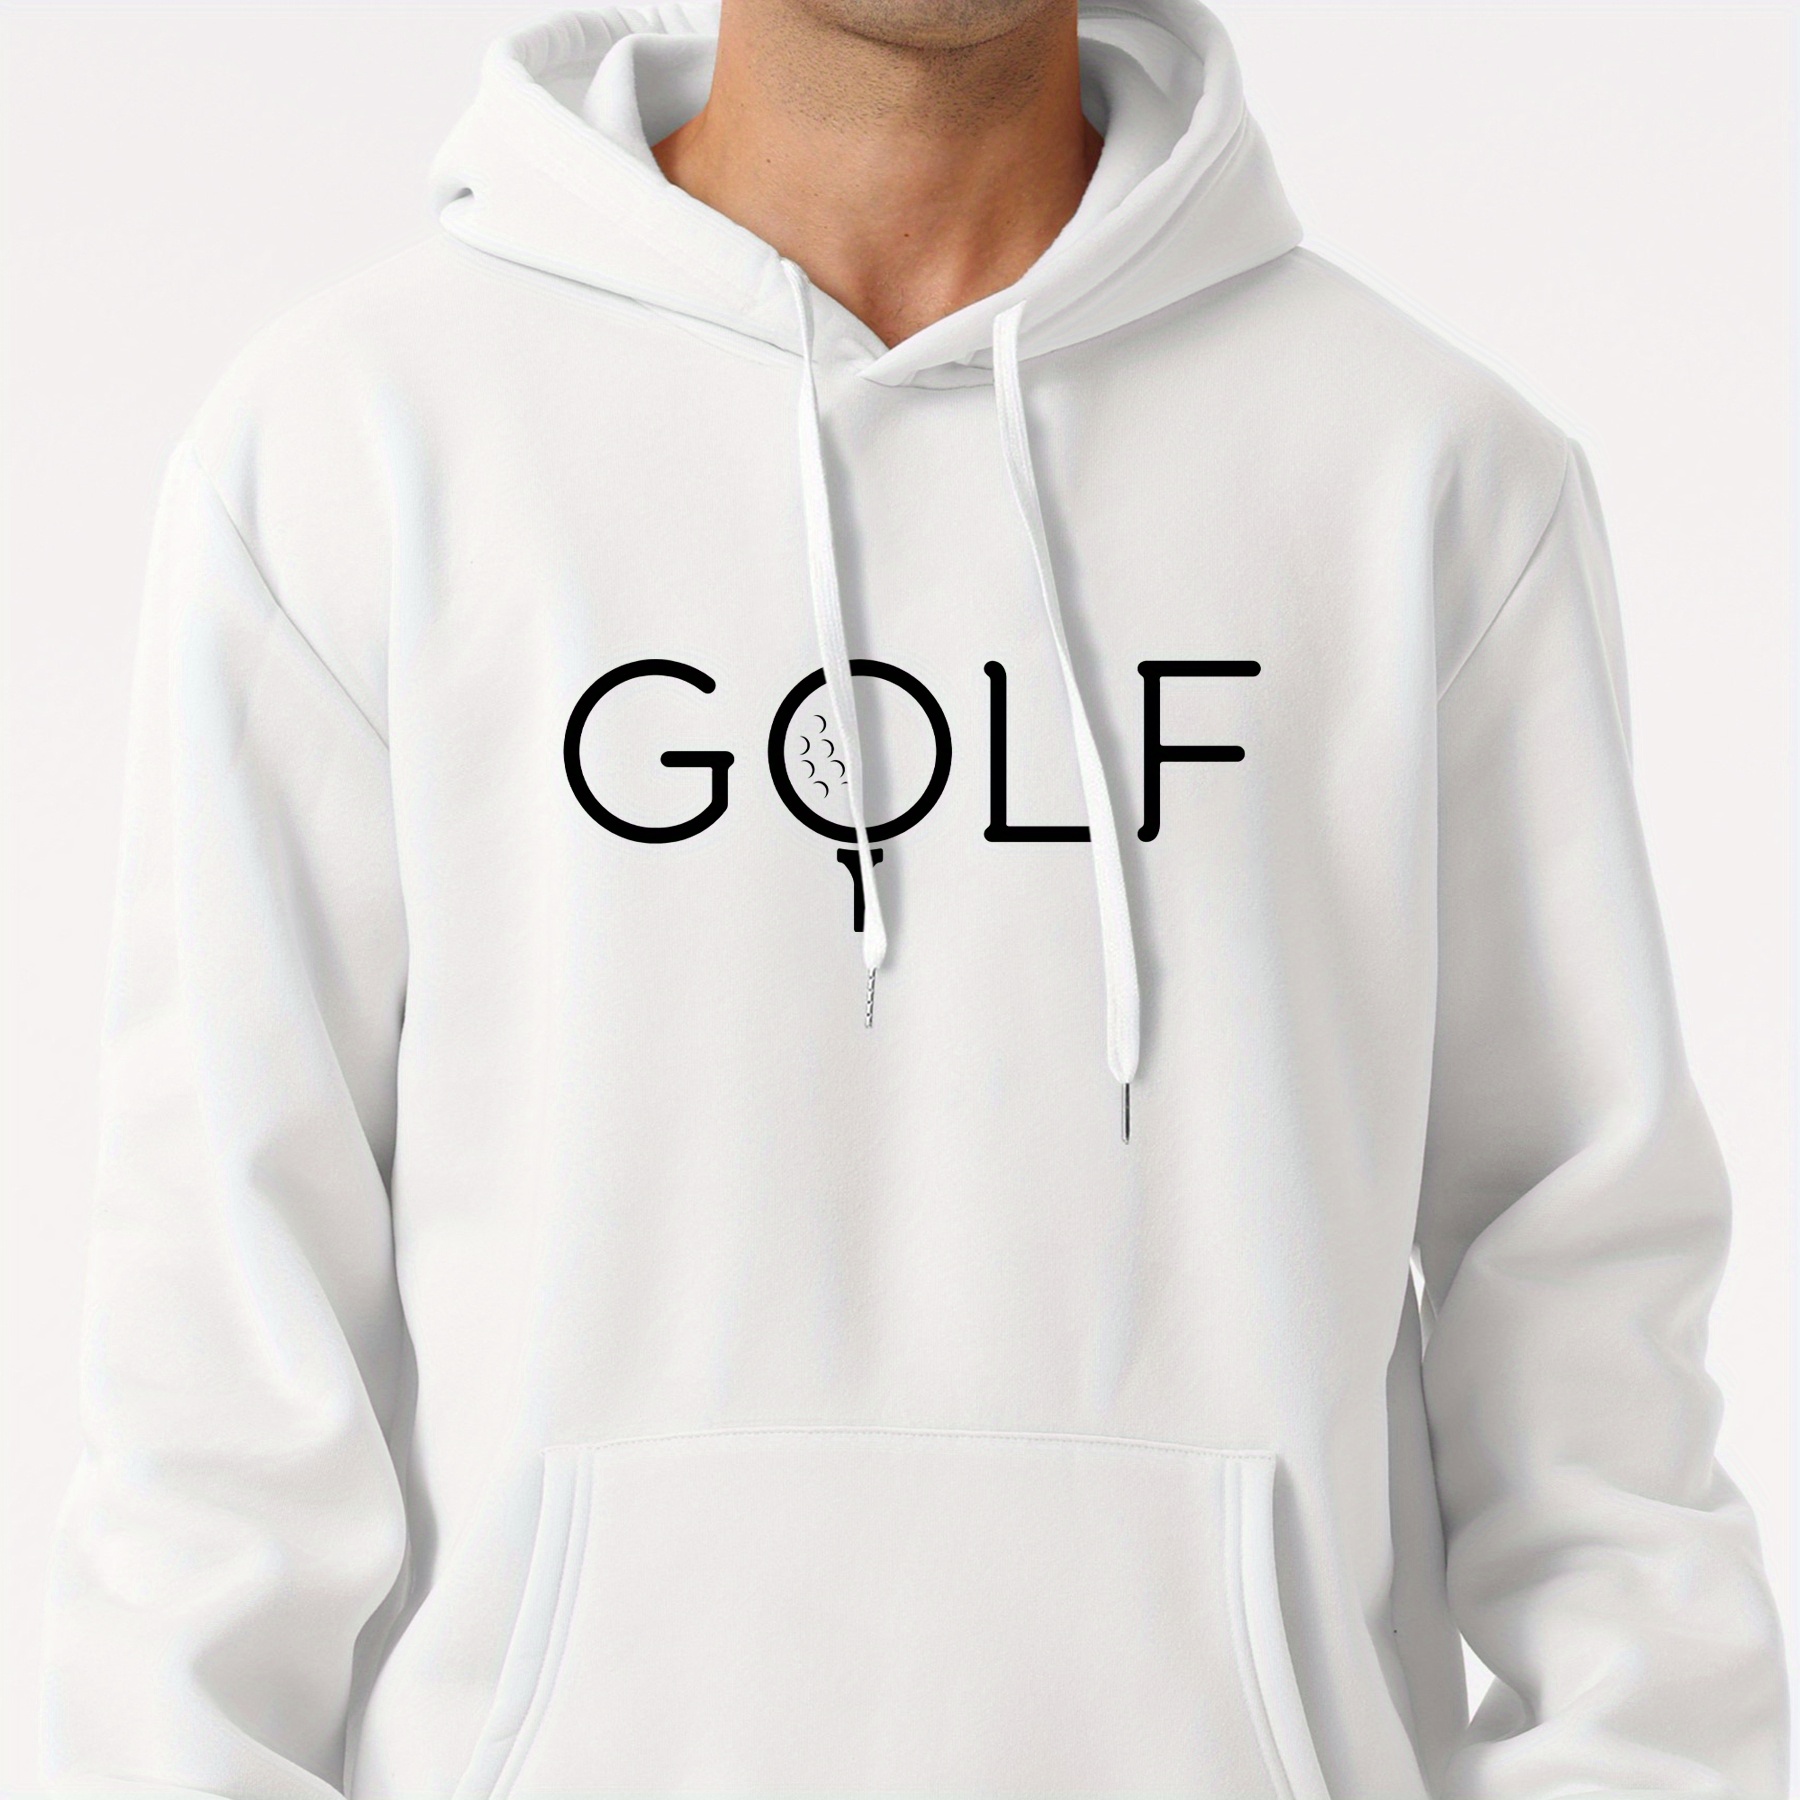 

Capital Letter Golf Print Men's Pullover Round Neck Hooded Sweatshirt Print Hoodie Casual Top For Autumn Winter Men's Clothing As Gifts